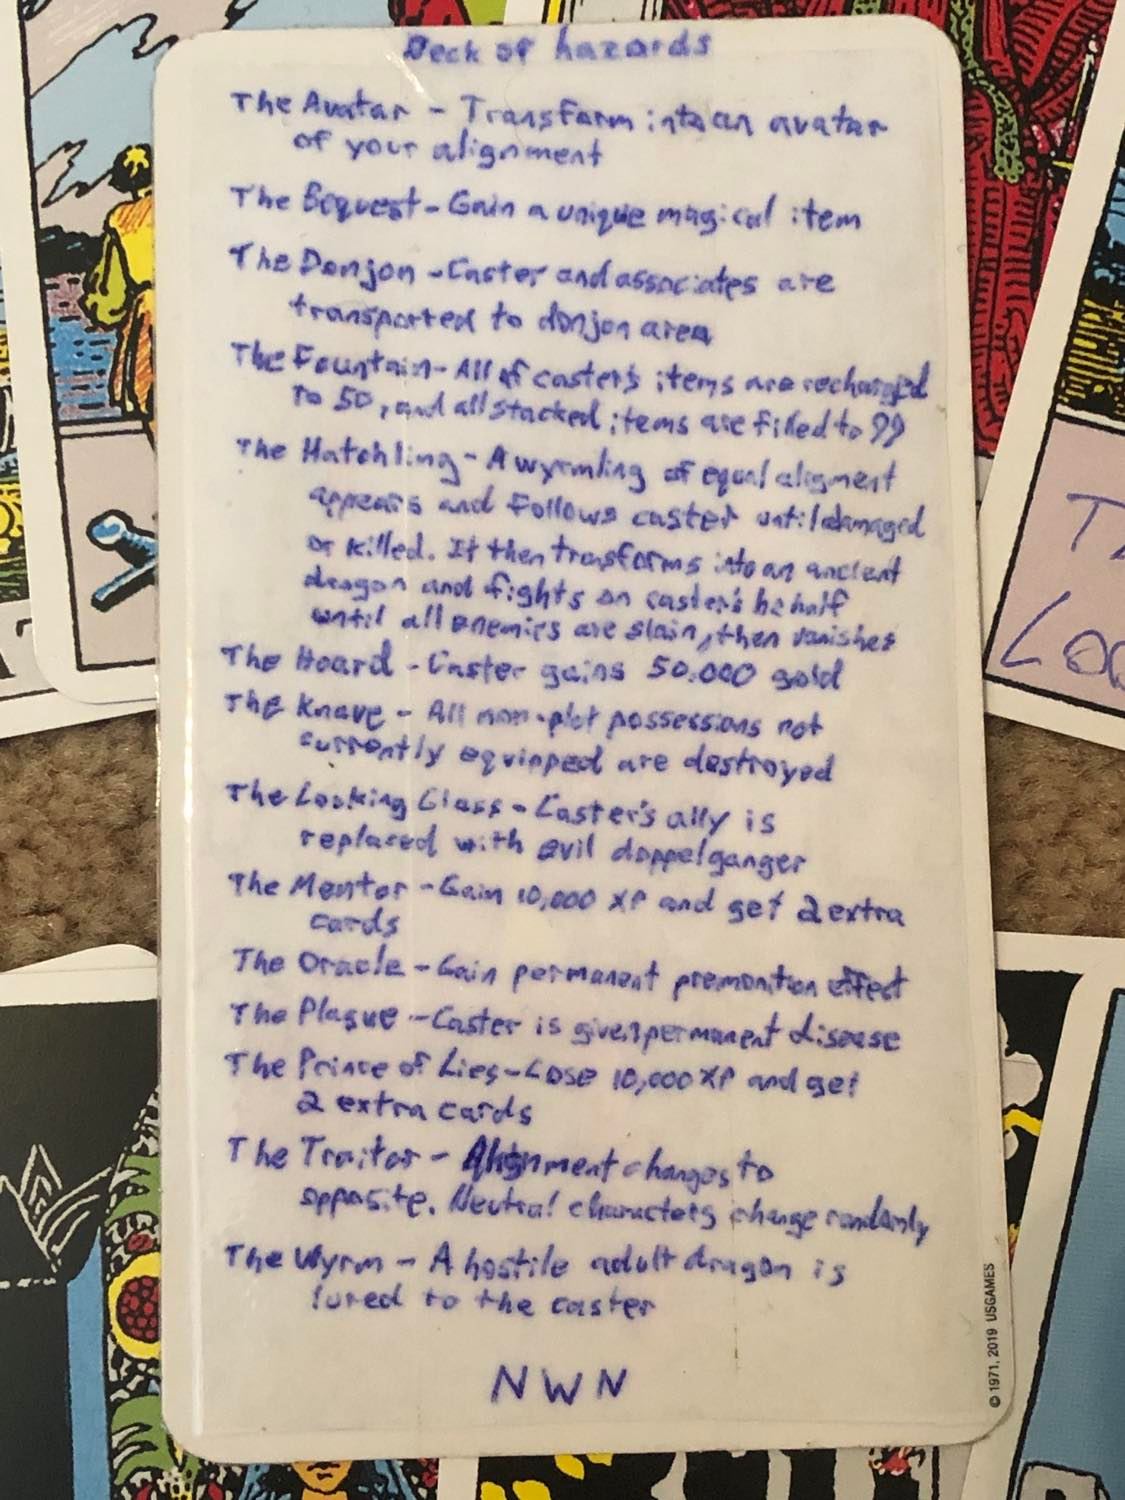 The card with the rules for the deck of hazards, written in blue pen